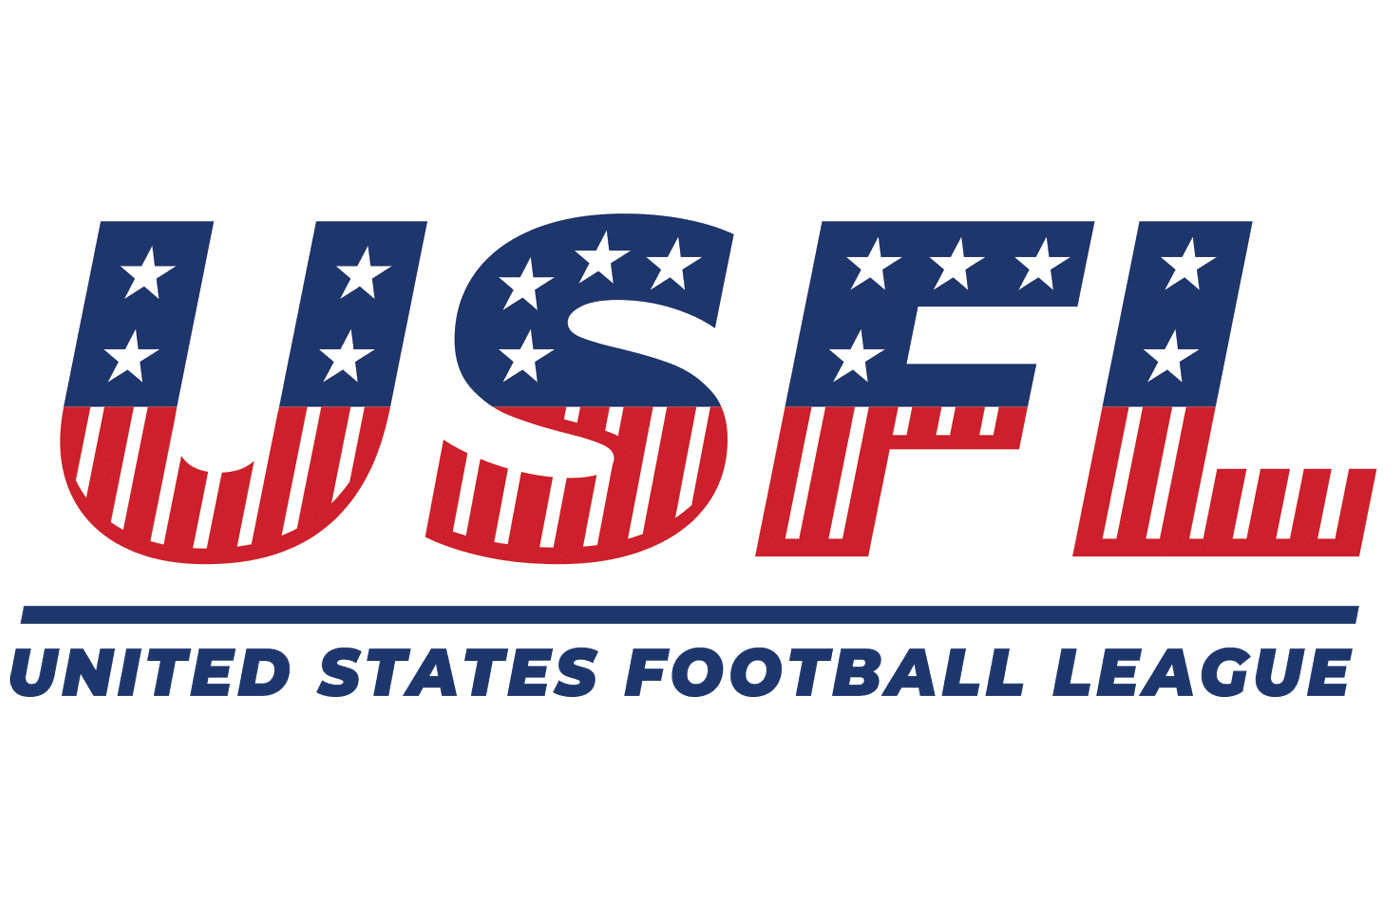 United States Football League (USFL) logo and symbol, meaning, history